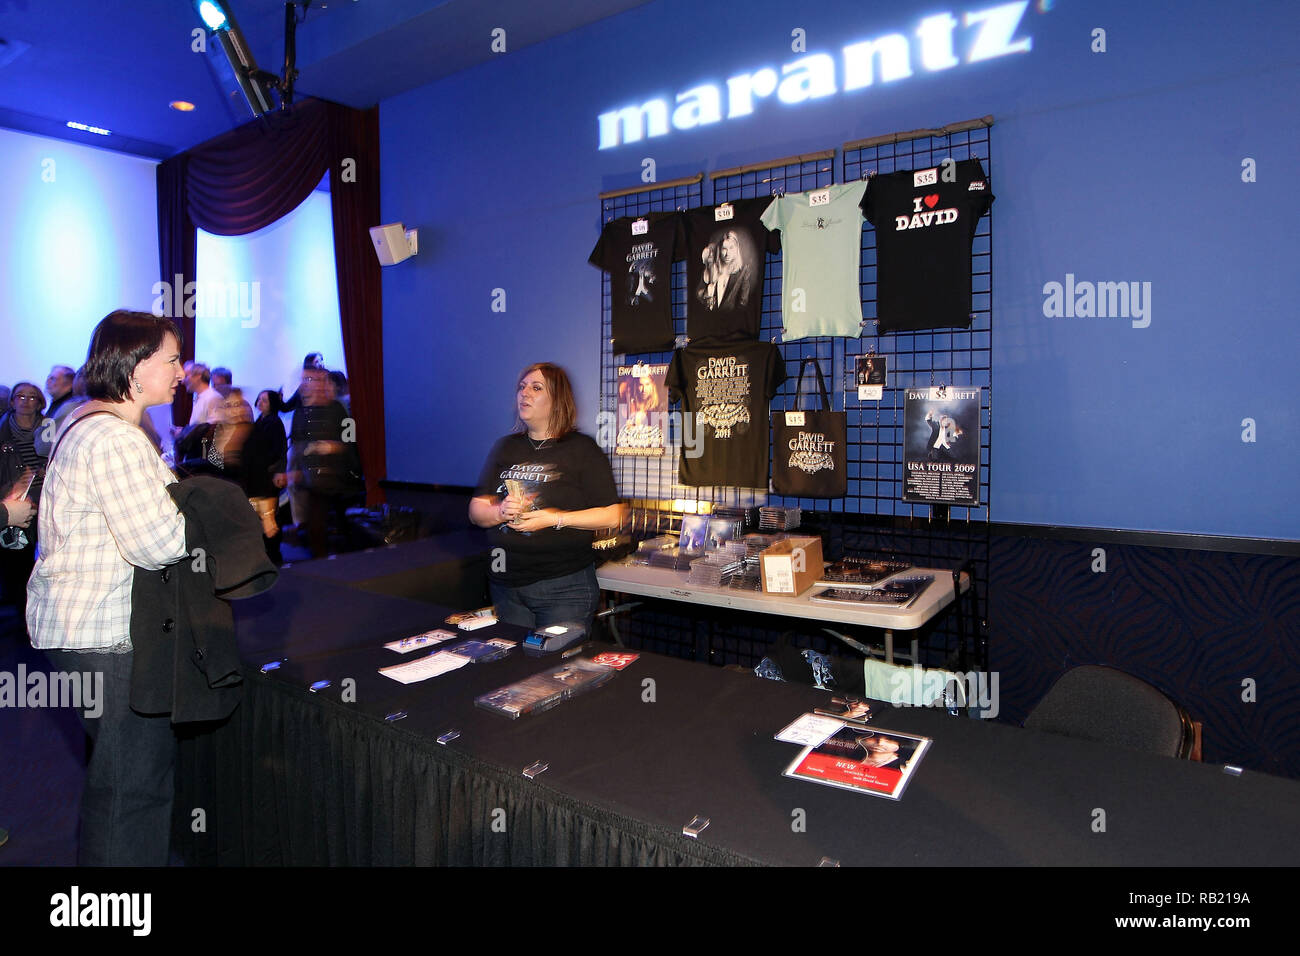 New York, USA. 18 Feb, 2011. Atmosphere at the David Garrett Concert Presented by Marantz at Best Buy Theater in New York, USA. Credit: Steve Mack/S.D. Mack Pictures/Alamy Stock Photo